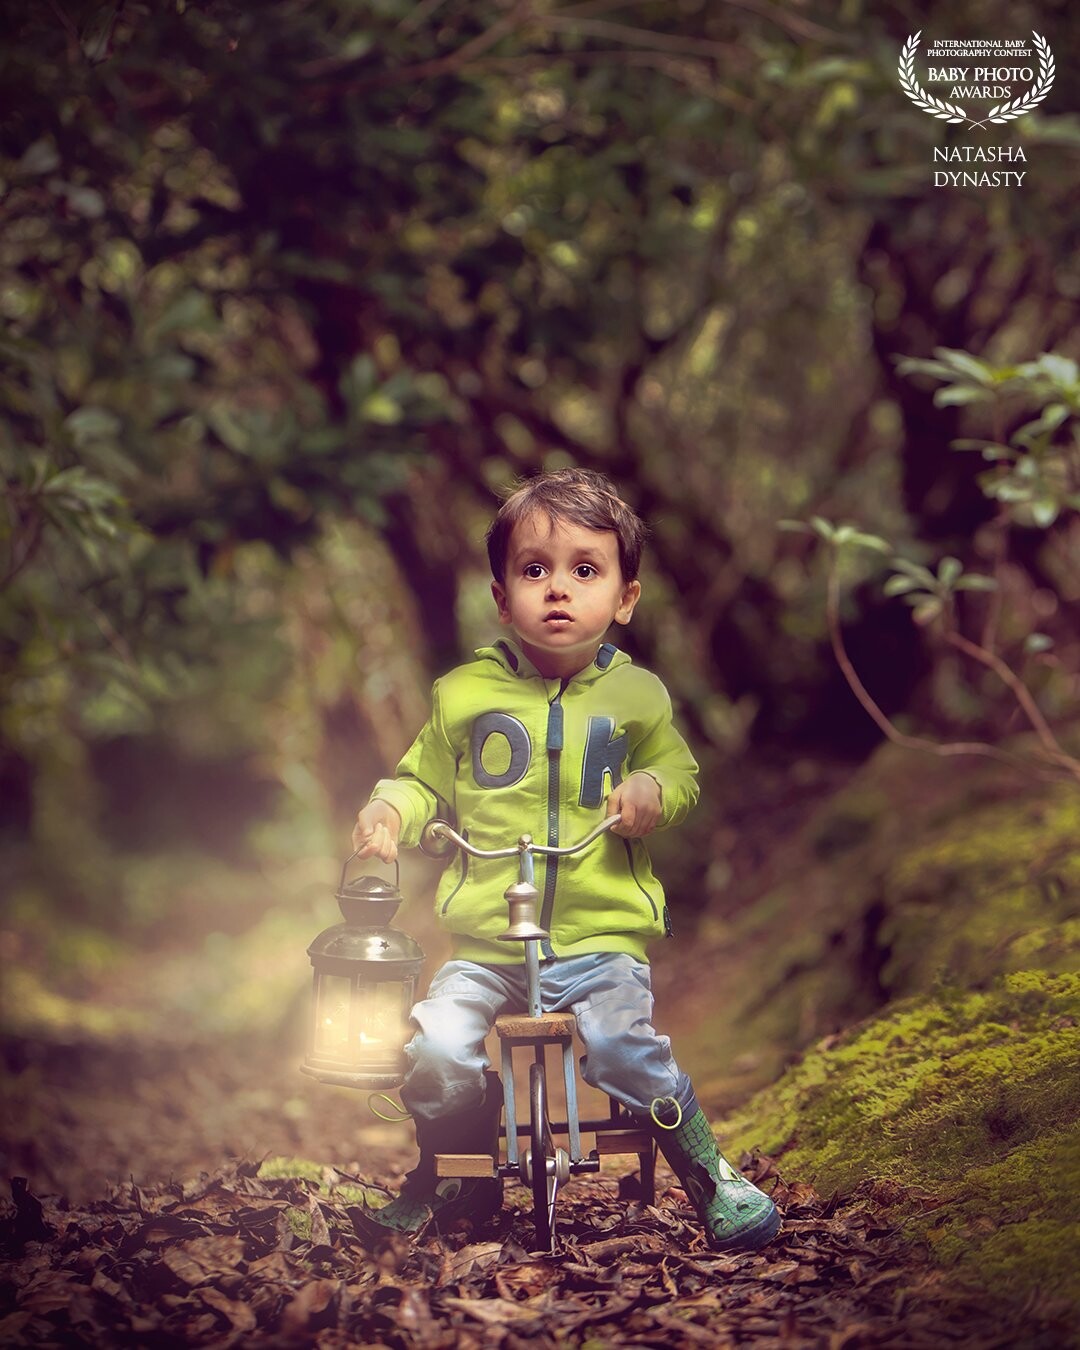 The Secret Forest Photoshoot. <br />
A little boy on a bike with a lantern in his hand, looking at something so amazing that he can't take his eyes off. Breathtaking moment.<br />
When I shoot in the forest I can feel the magic of the forest, fresh air and the smell of it, it's pretty magnificent. You can get lost in time so easy. One of my favourite photoshoots as kids are so relaxed and taken by beauty of nature too. Hope you can feel this special magic in this photograph.